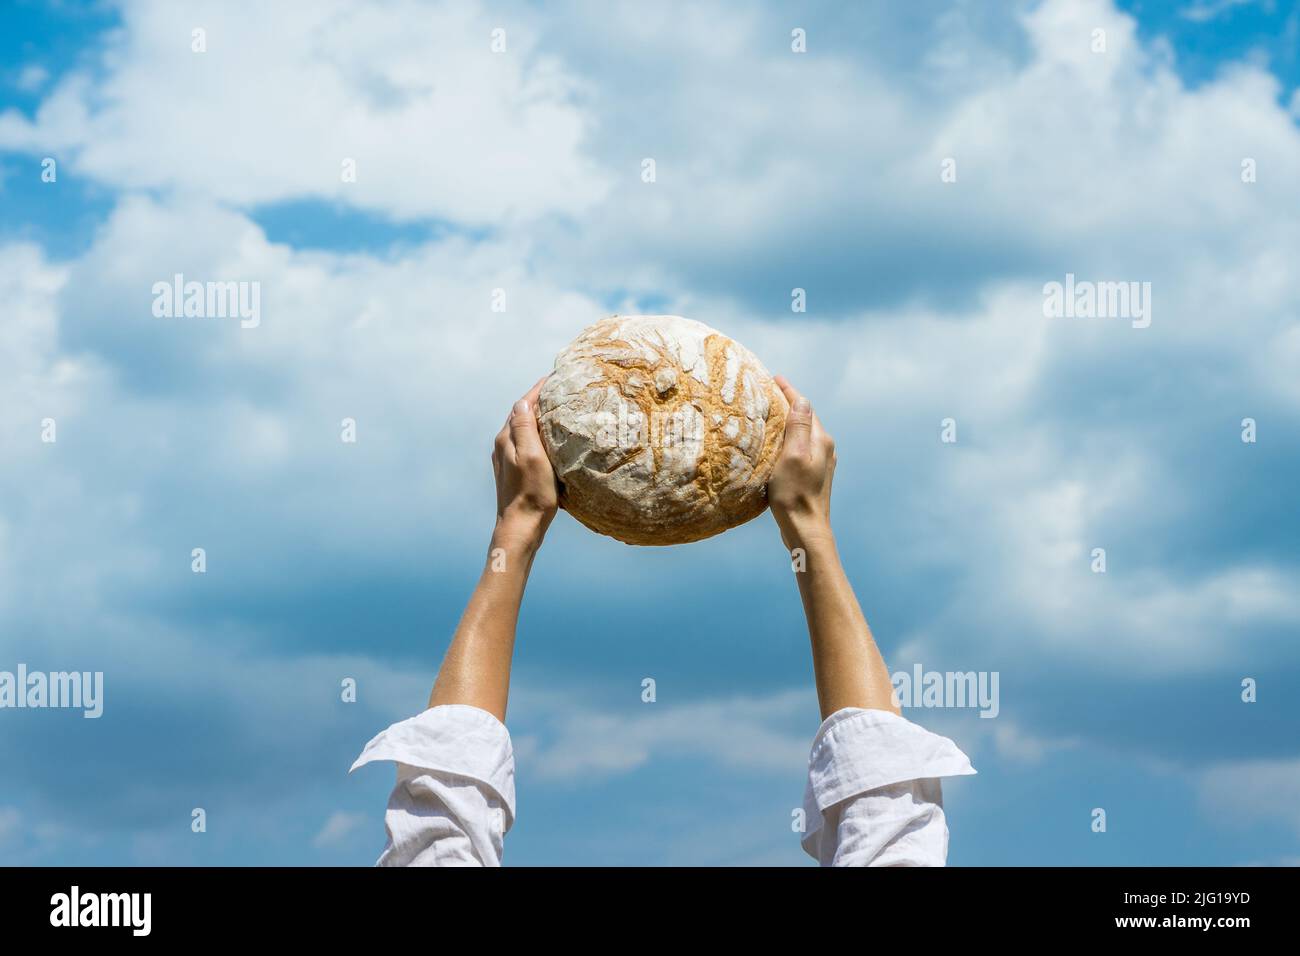 Female hands holding home baked bread loaf above her head over a blue summer sky. World food security concept. Stock Photo